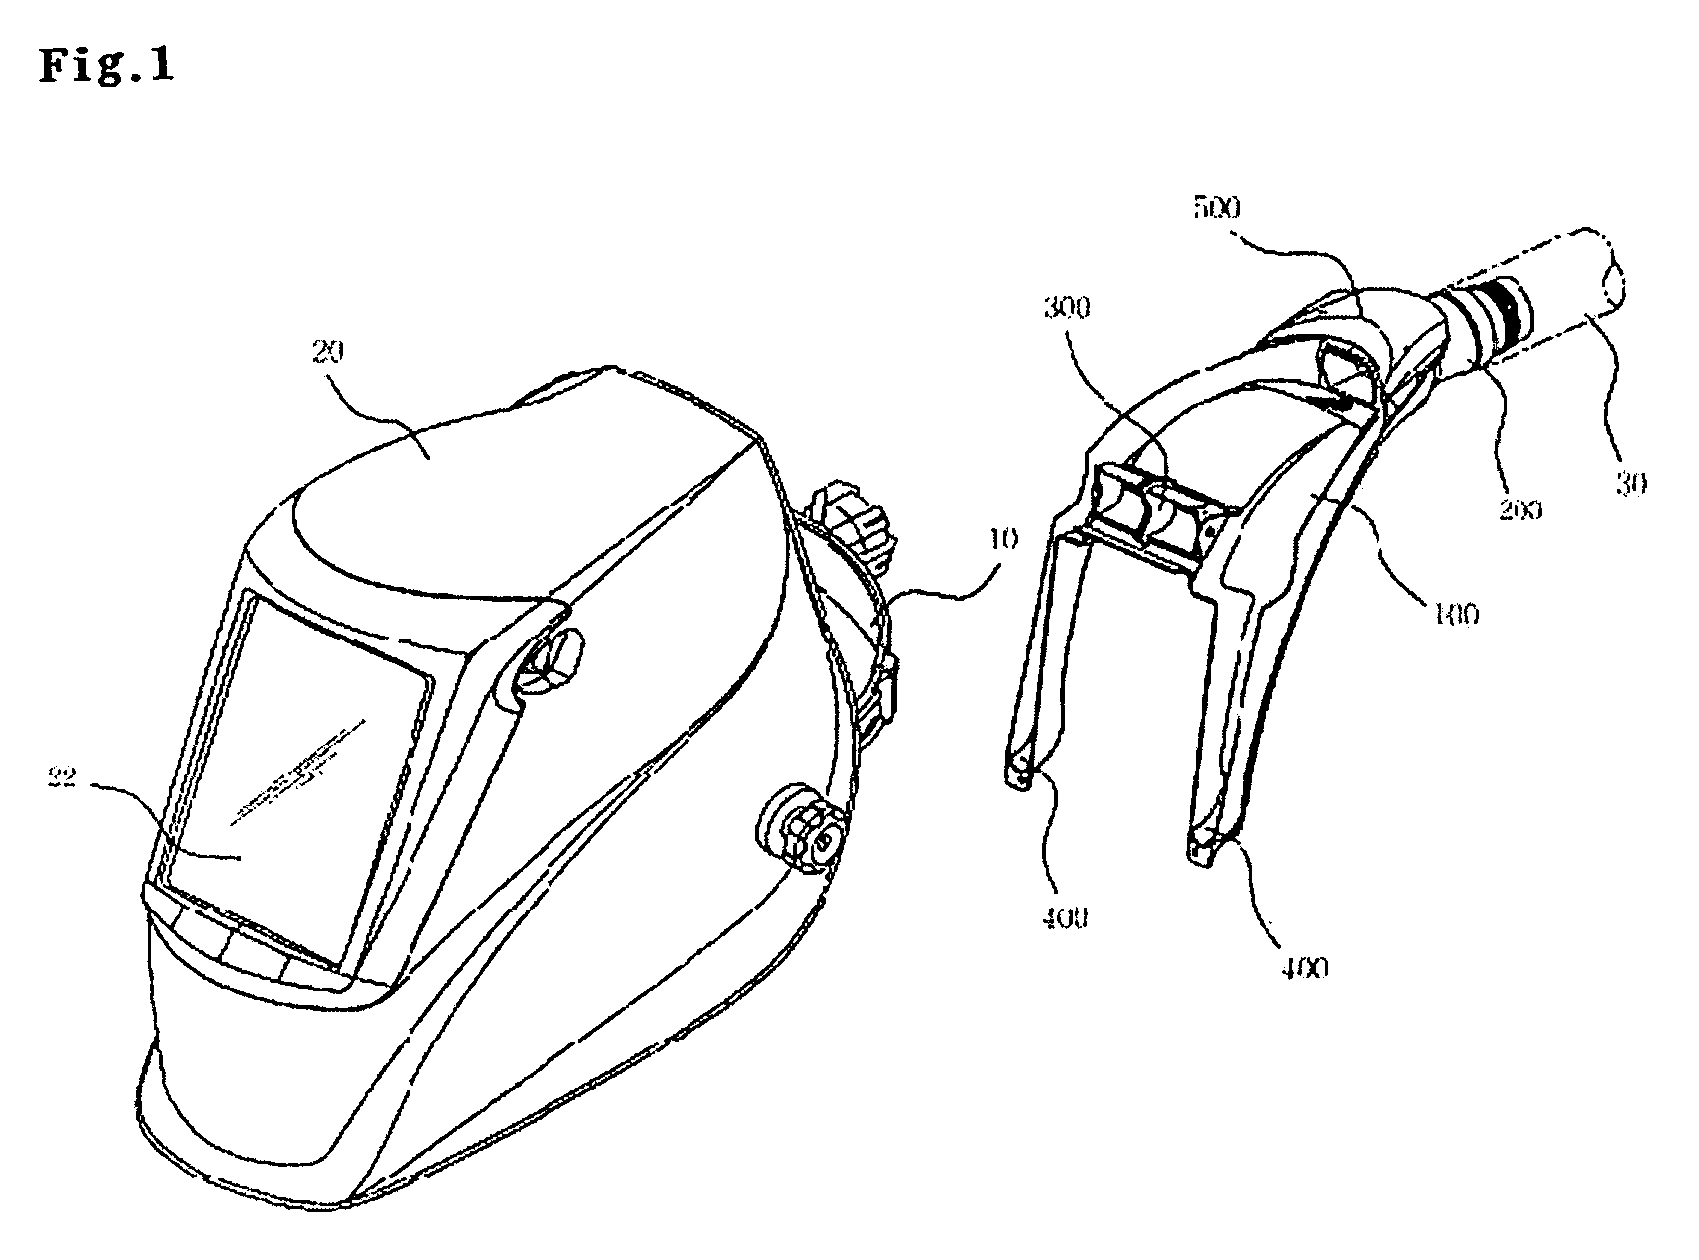 Air supplying device for welding mask